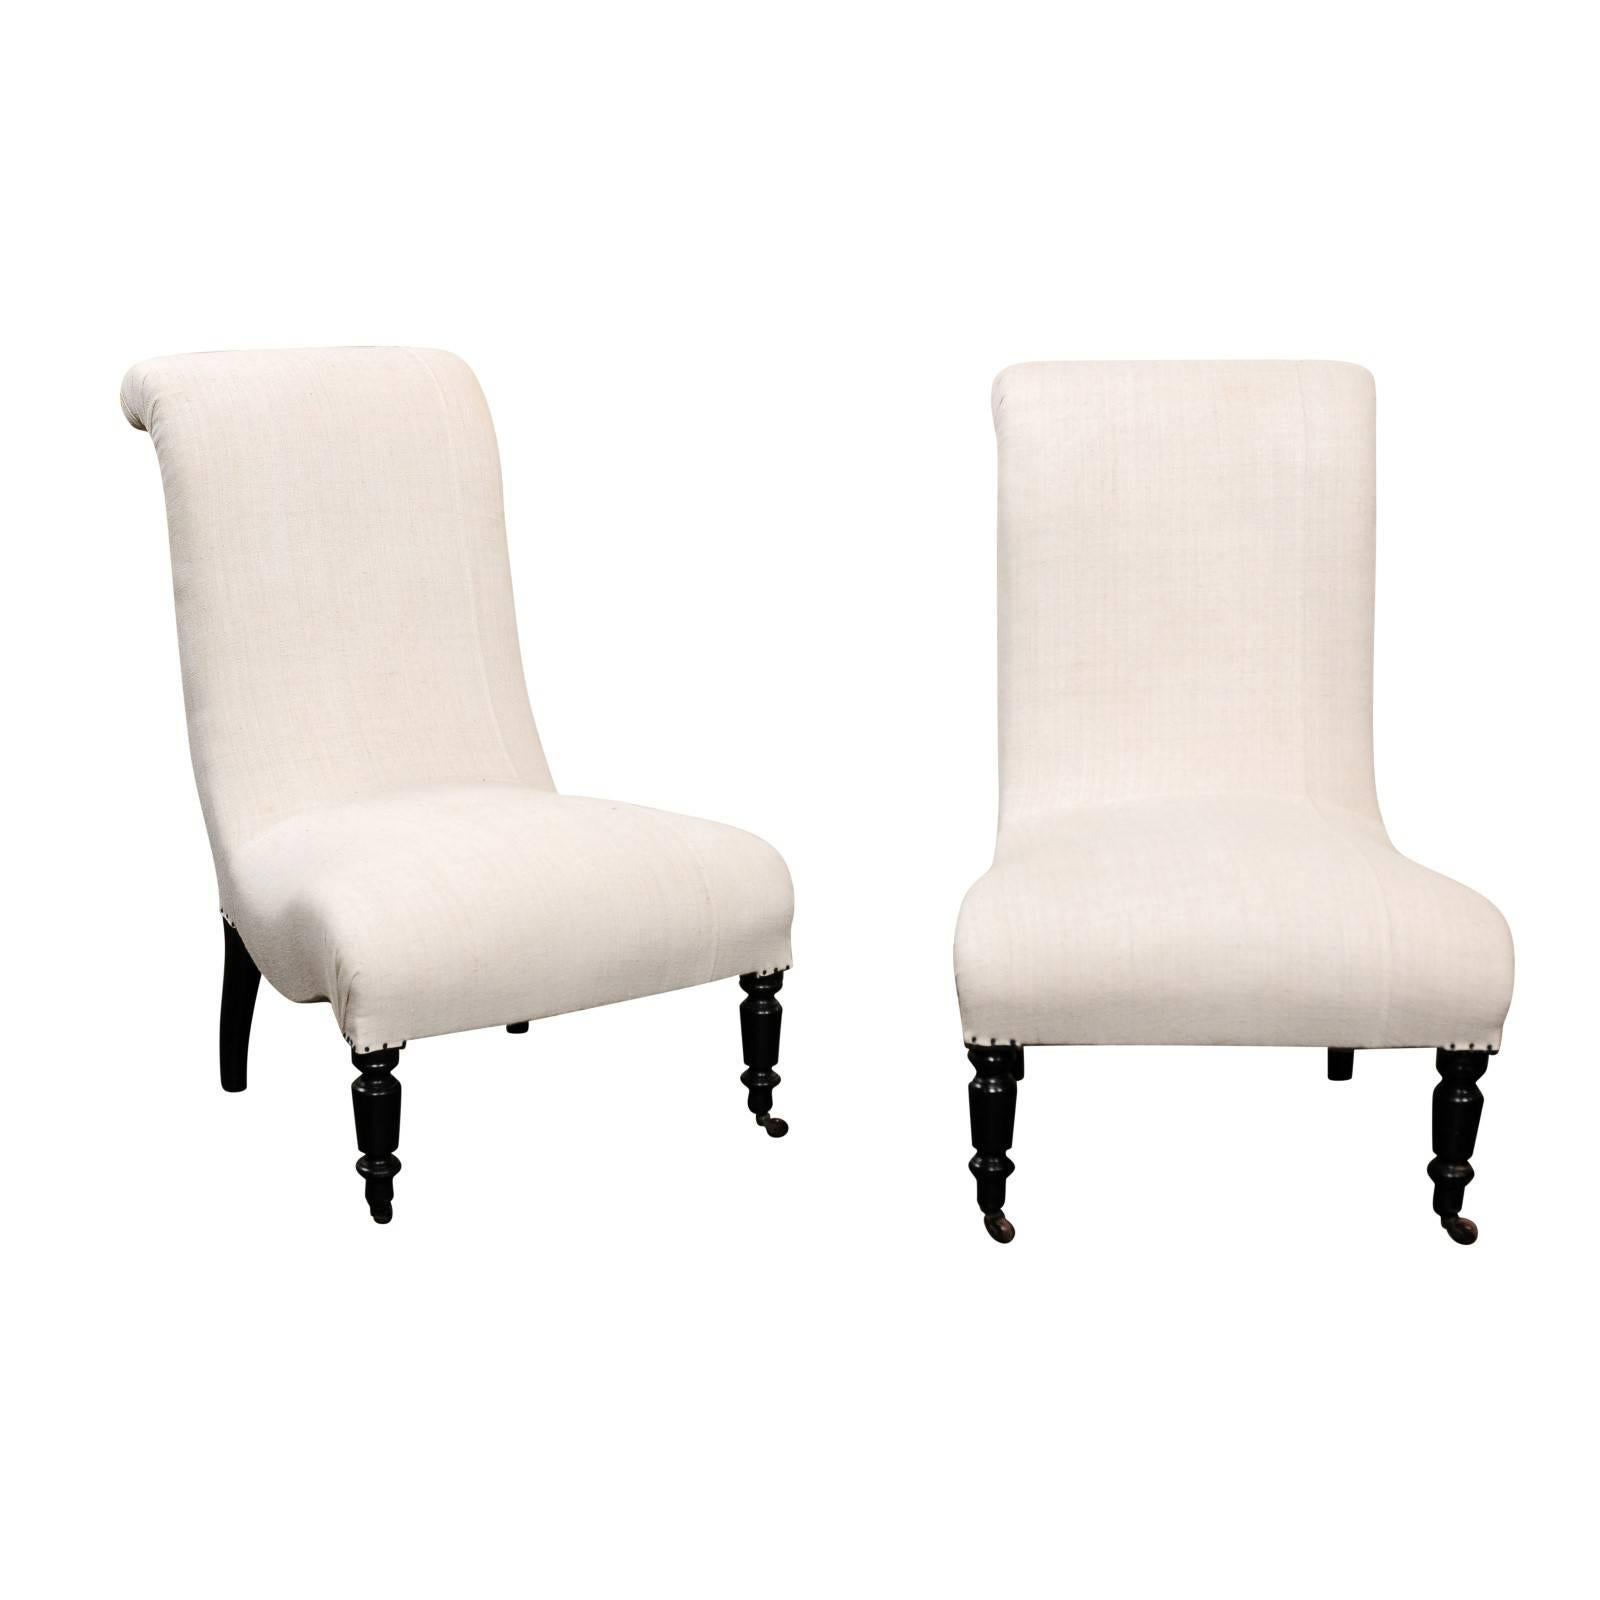 Pair of English Upholstered and Ebonized Wood Slipper Chairs, circa 1900